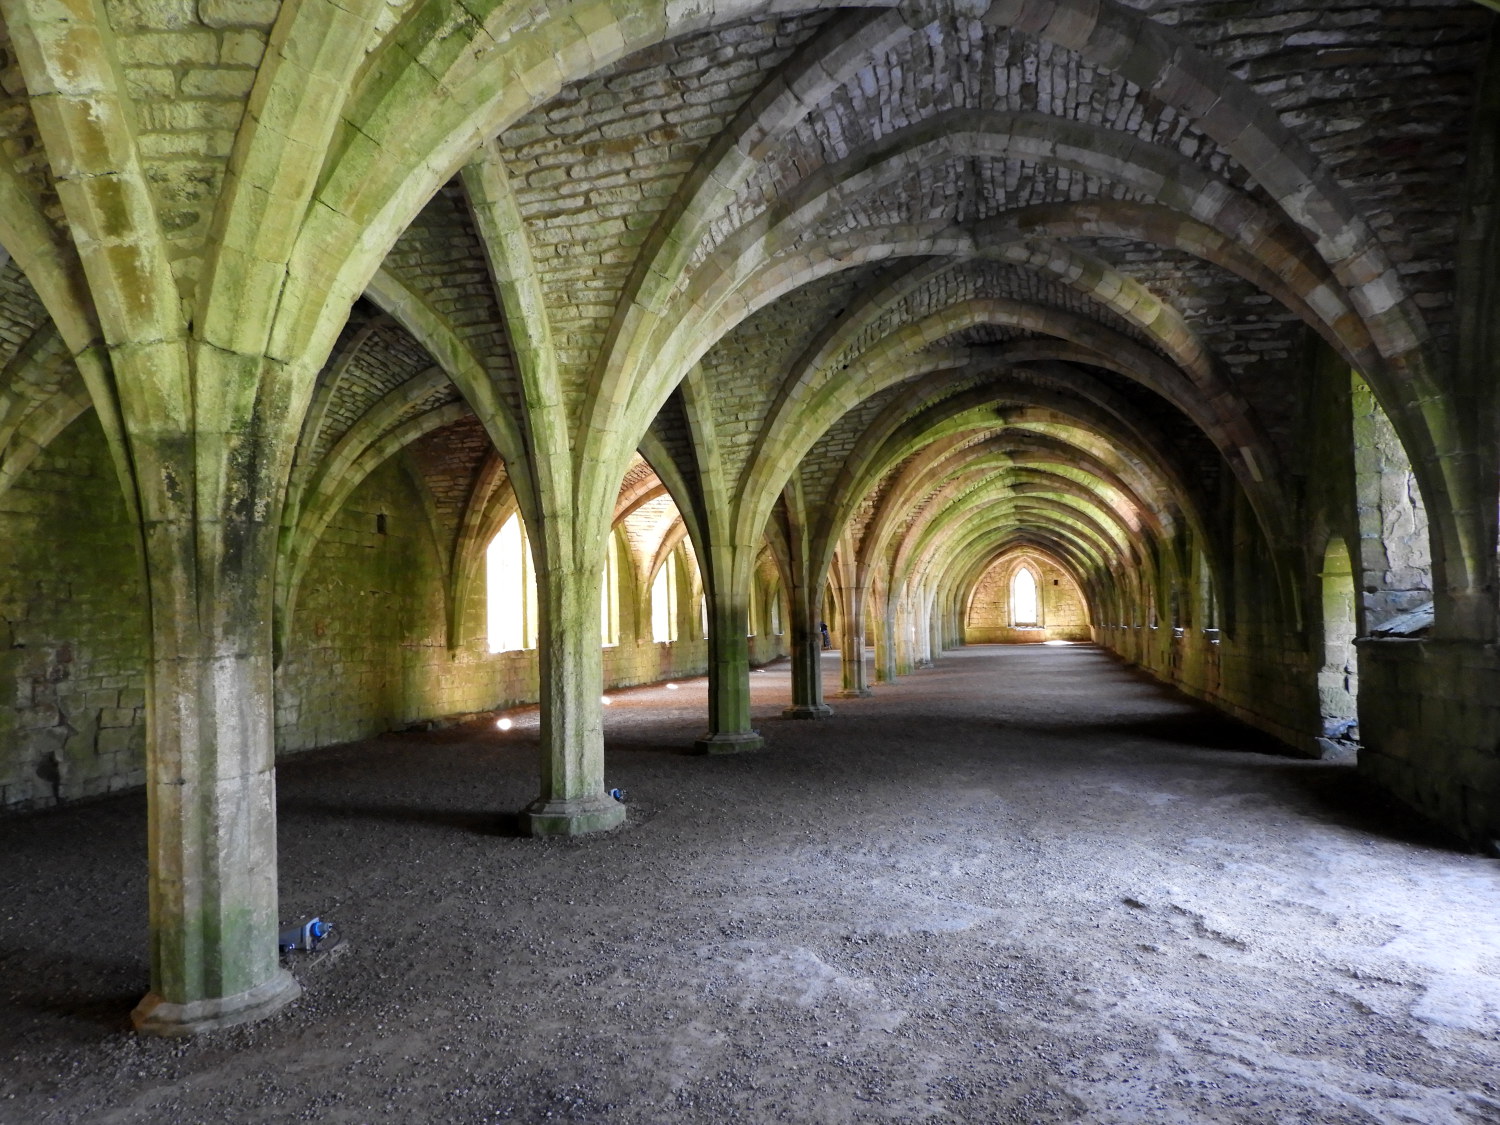 The Great Cloister, Fountains Abbey